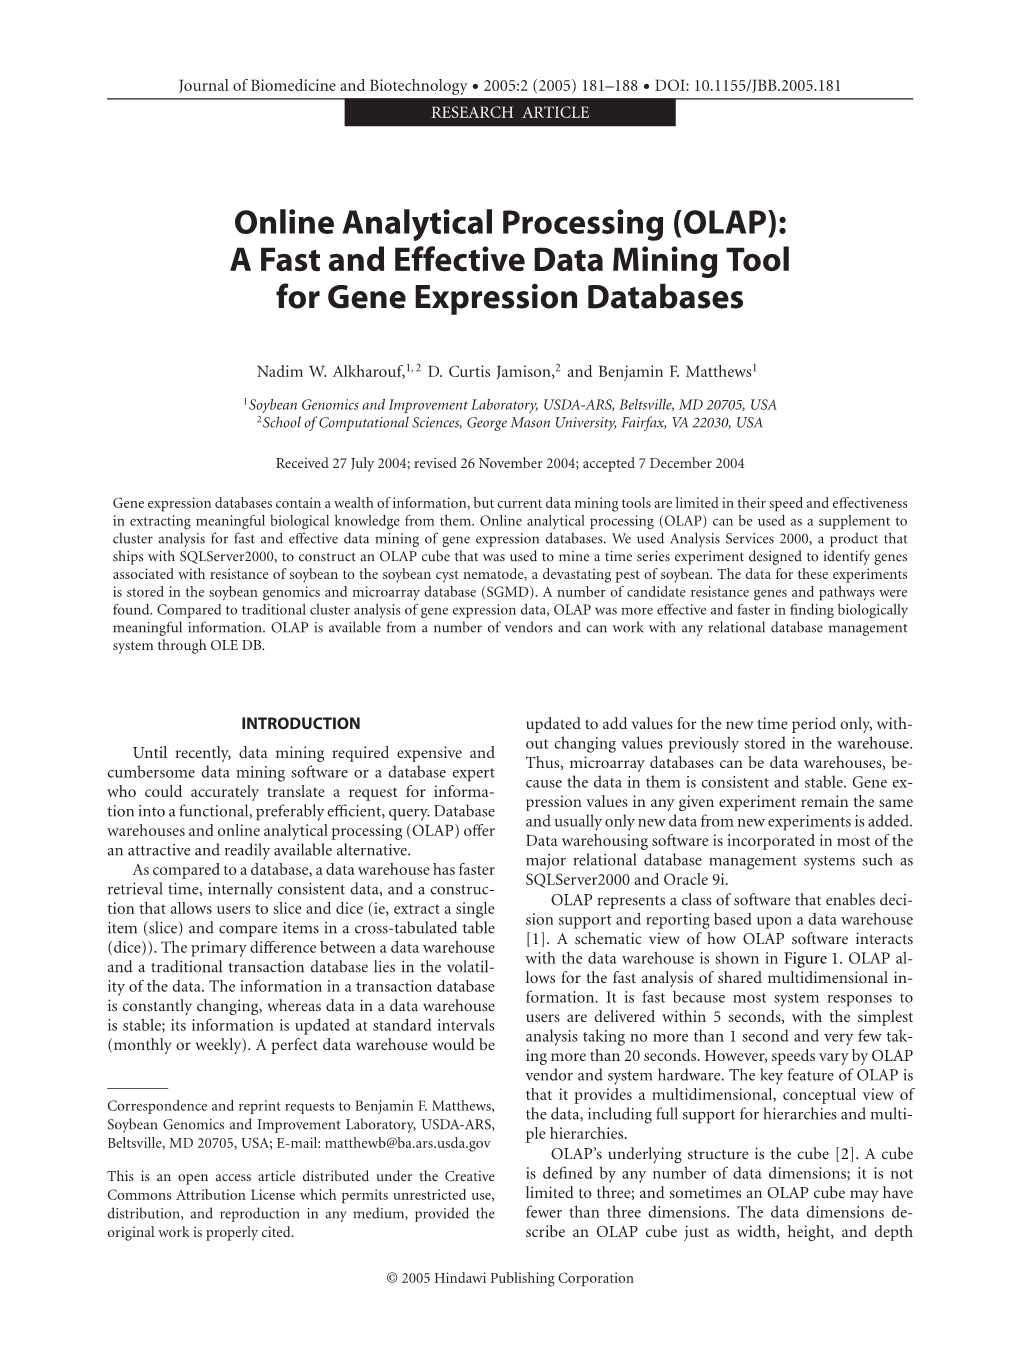 Online Analytical Processing (OLAP): a Fast and Effective Data Mining Tool for Gene Expression Databases